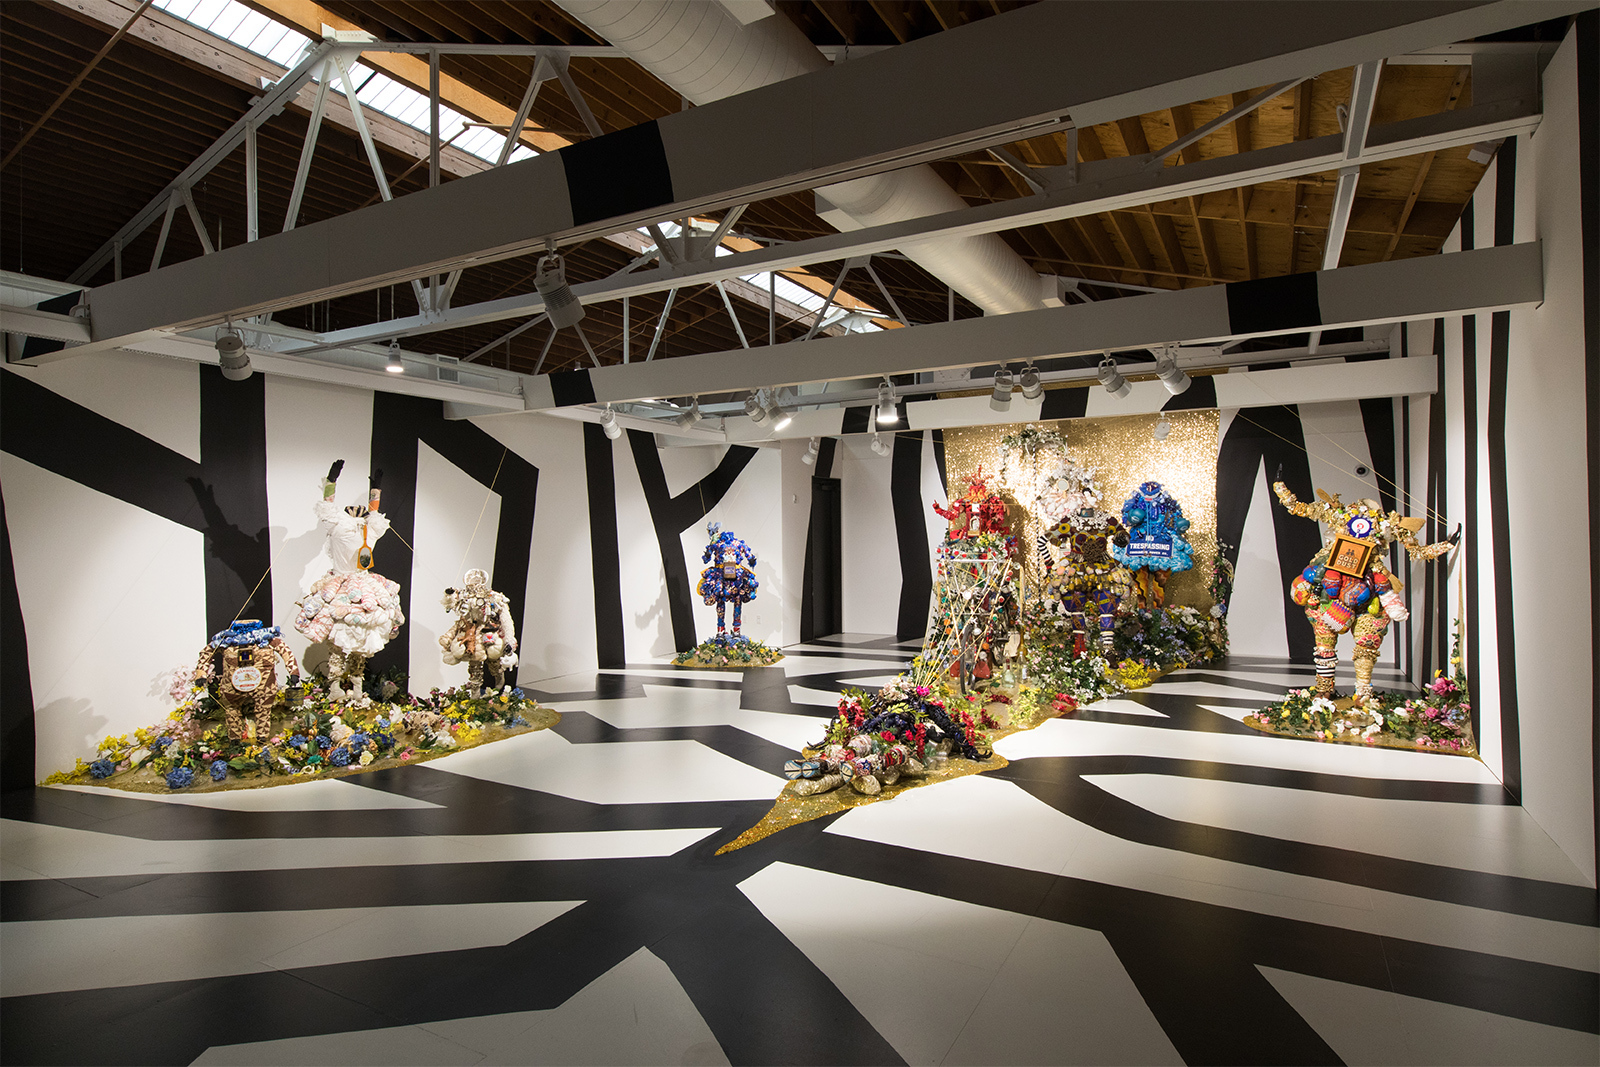 Vanessa German - full view of exhibit. The gallery is painted with black and white stripes filling the walls and floor. 10 life-size human figures are distributed throughout. The feeling is ominous but also whimsical and joyous.